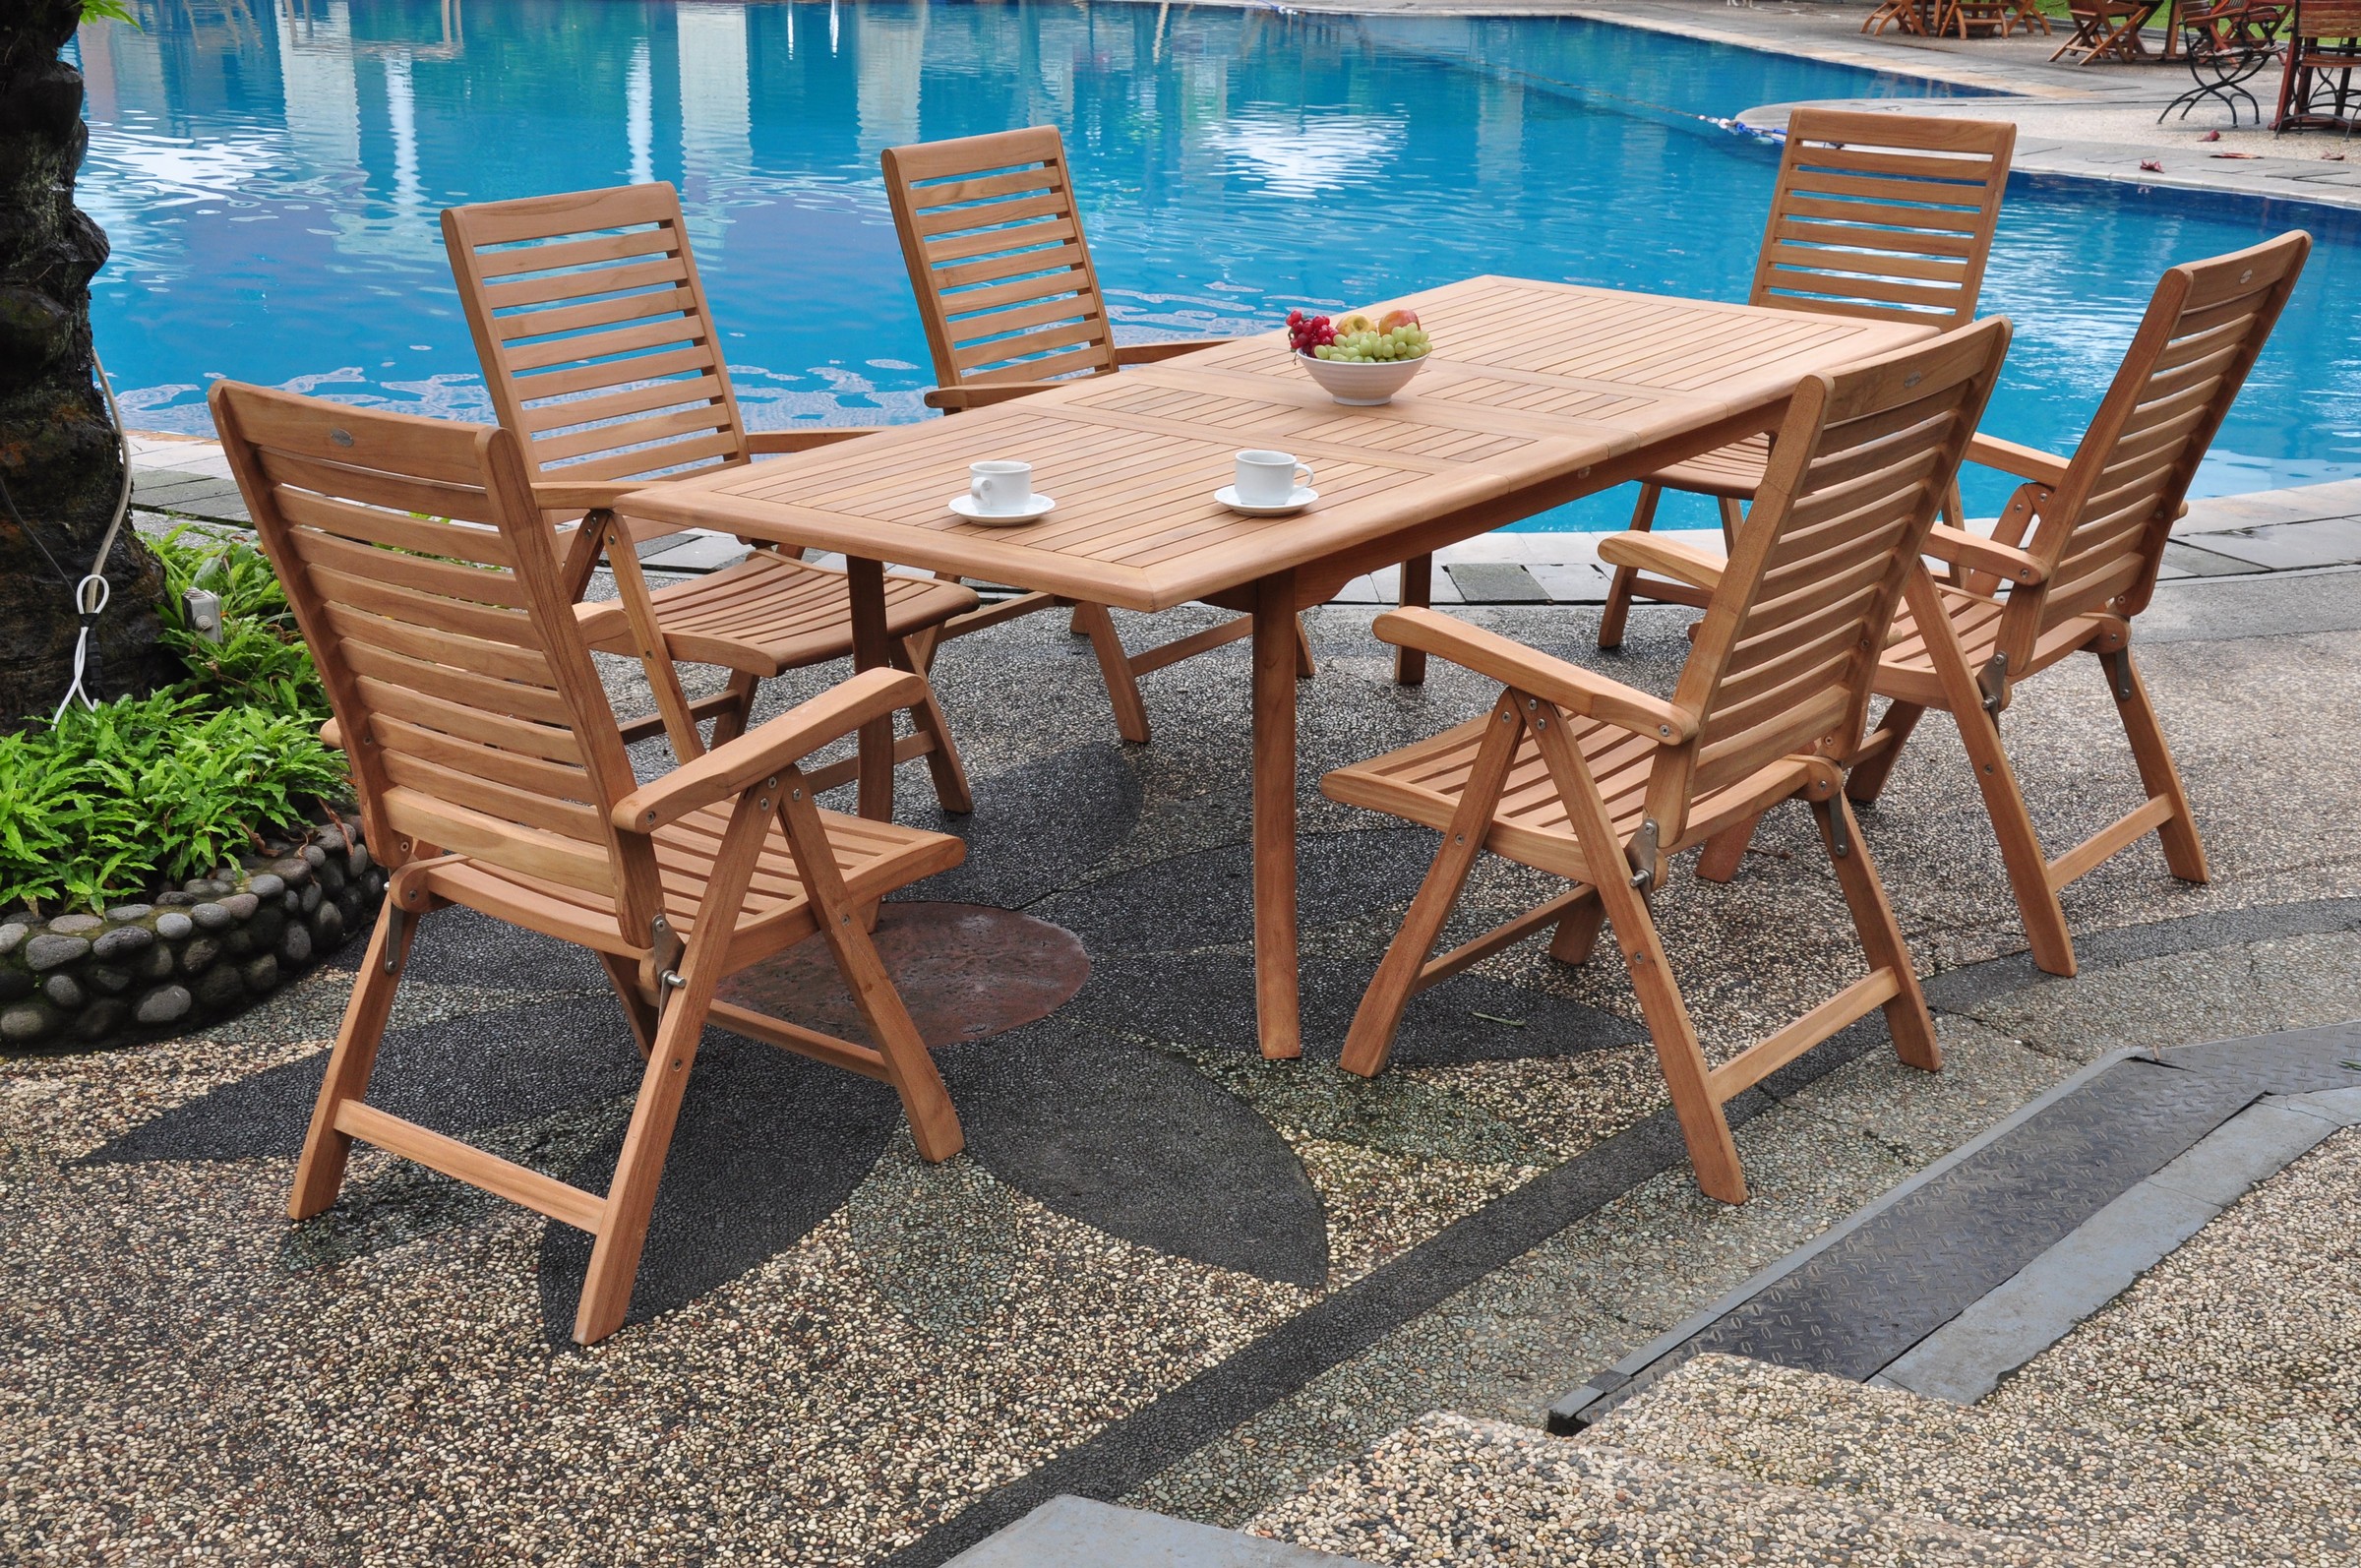 Teak Dining Set:6 Seater 7 Pc - 94" Rectangle Table And 6 Ashley Reclining Arm Chairs Outdoor Patio Grade-A Teak Wood WholesaleTeak #WMDSASa - image 4 of 4